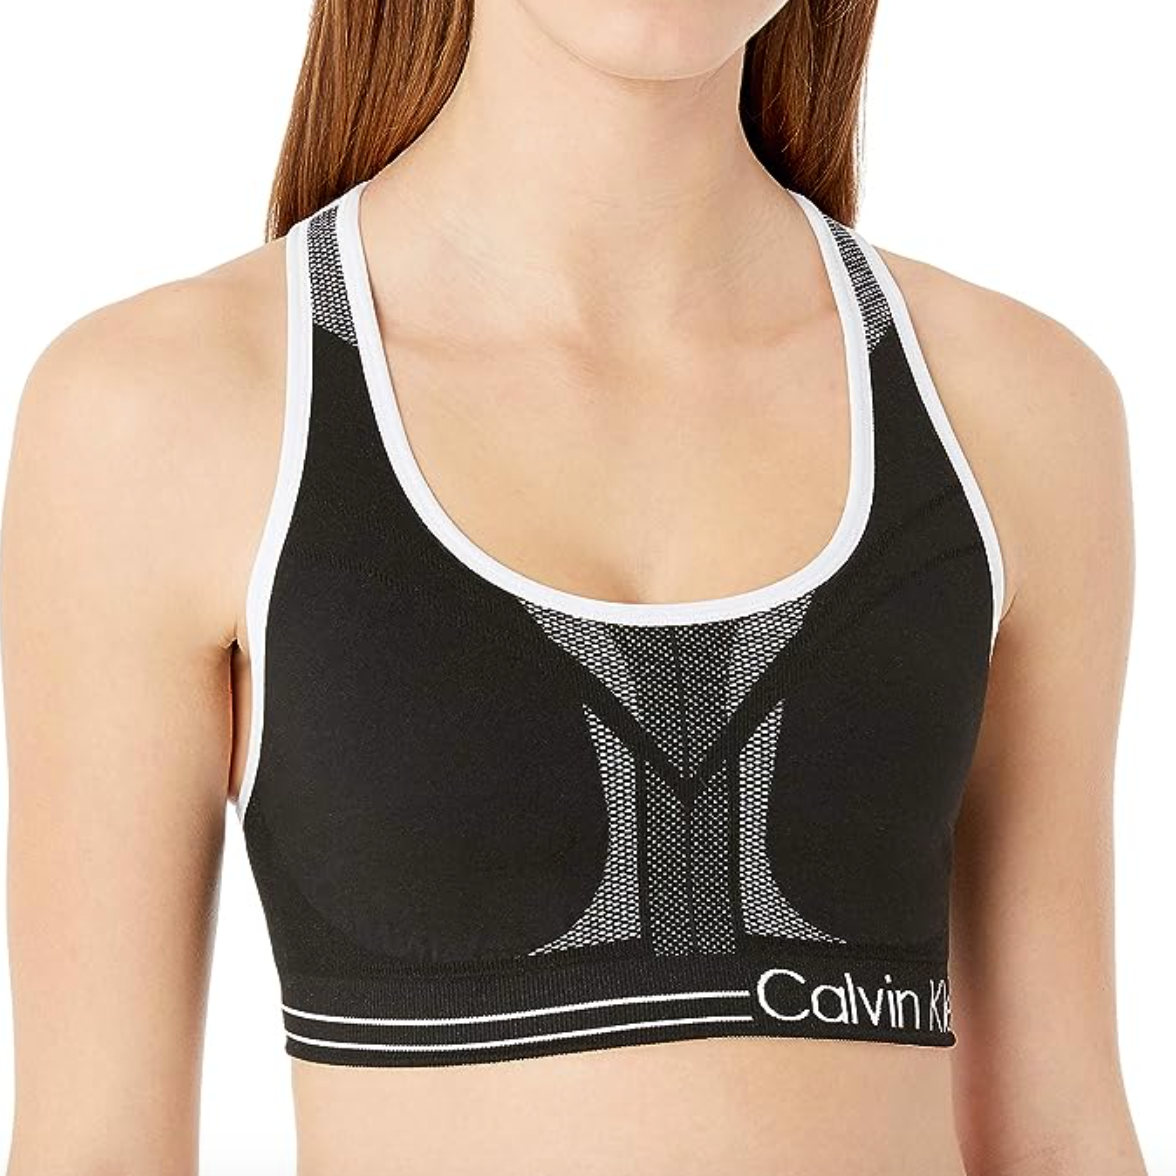 Calvin Klein\'s Iconic Underwear for Men and Women Is Up to 60% Off at  Amazon Right Now | Entertainment Tonight